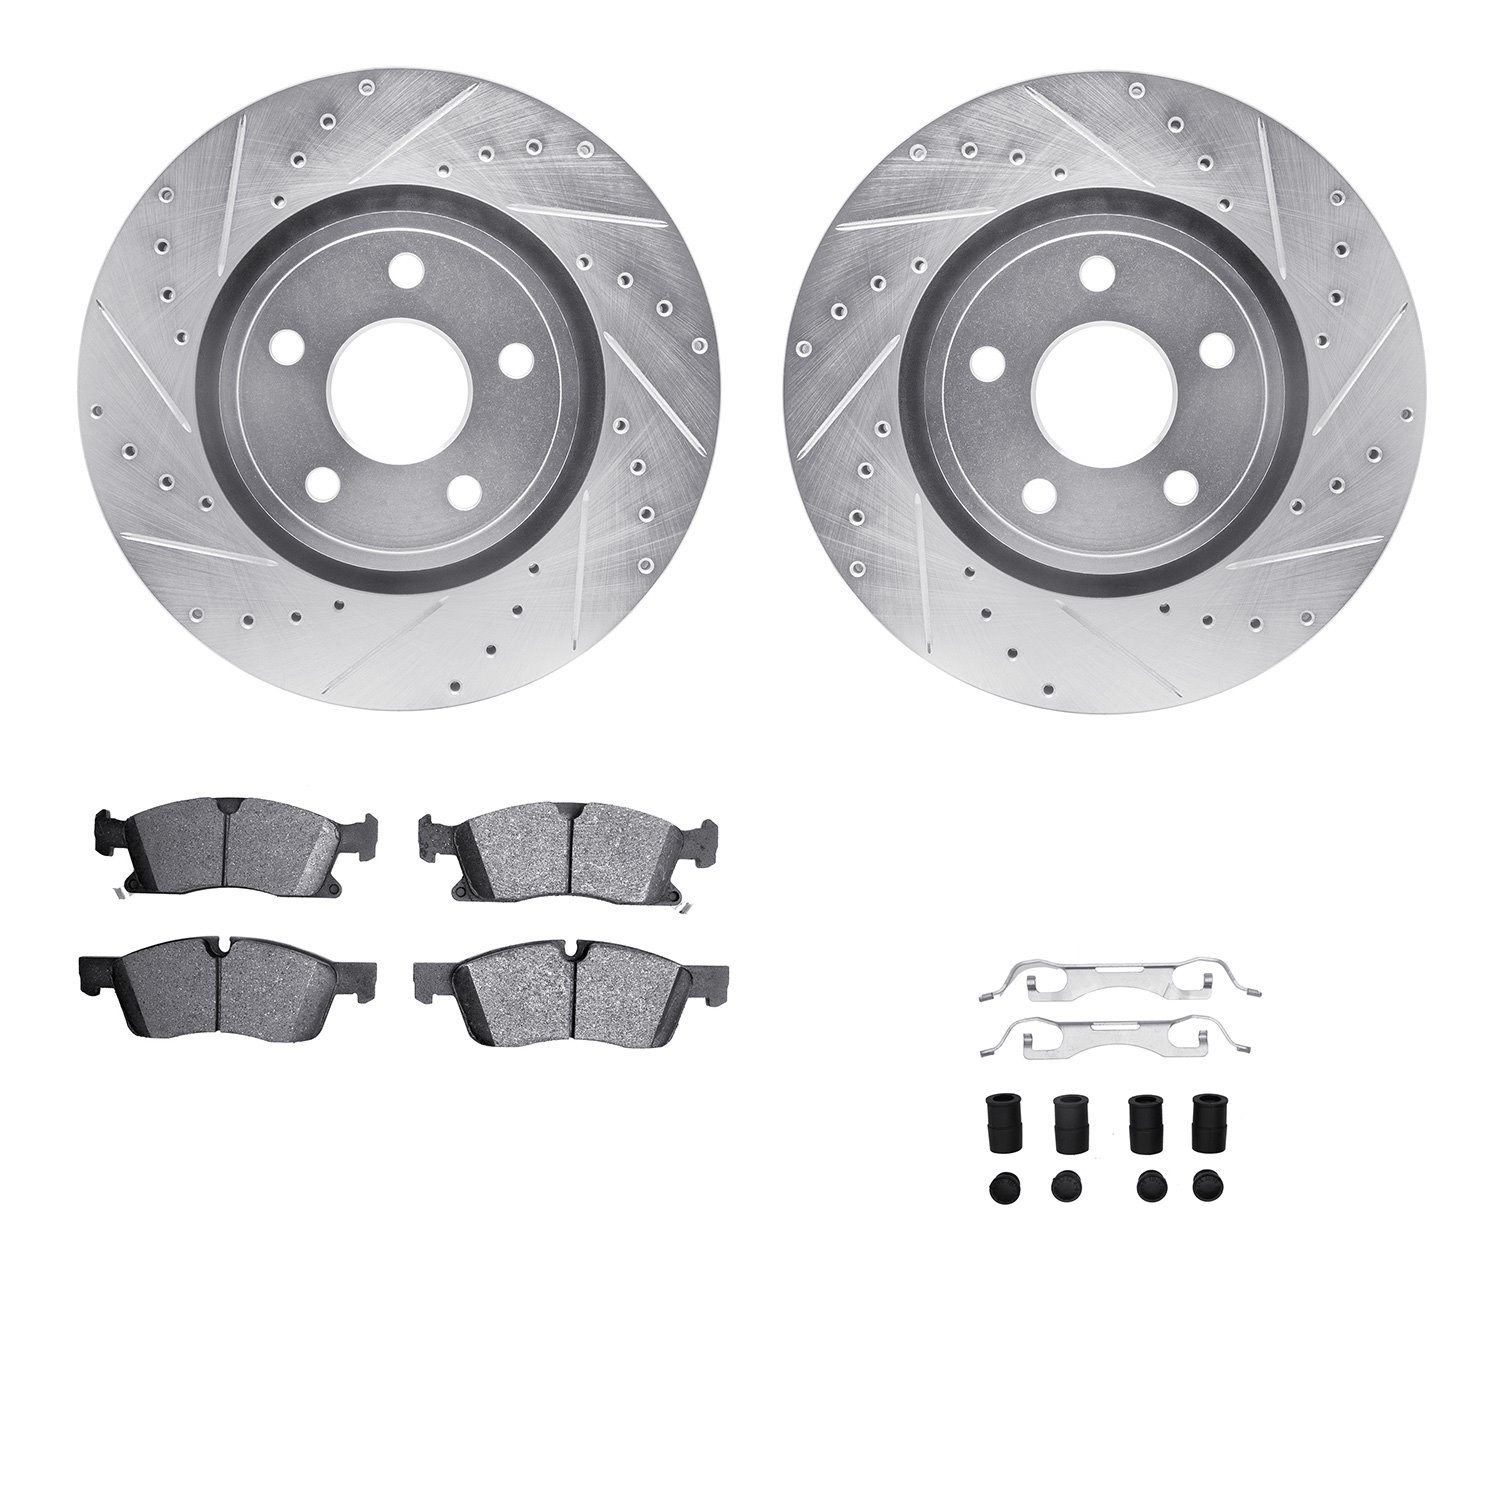 7612-42004 Drilled/Slotted Brake Rotors w/5000 Euro Ceramic Brake Pads Kit & Hardware [Silver], Fits Select Mopar, Position: Fro